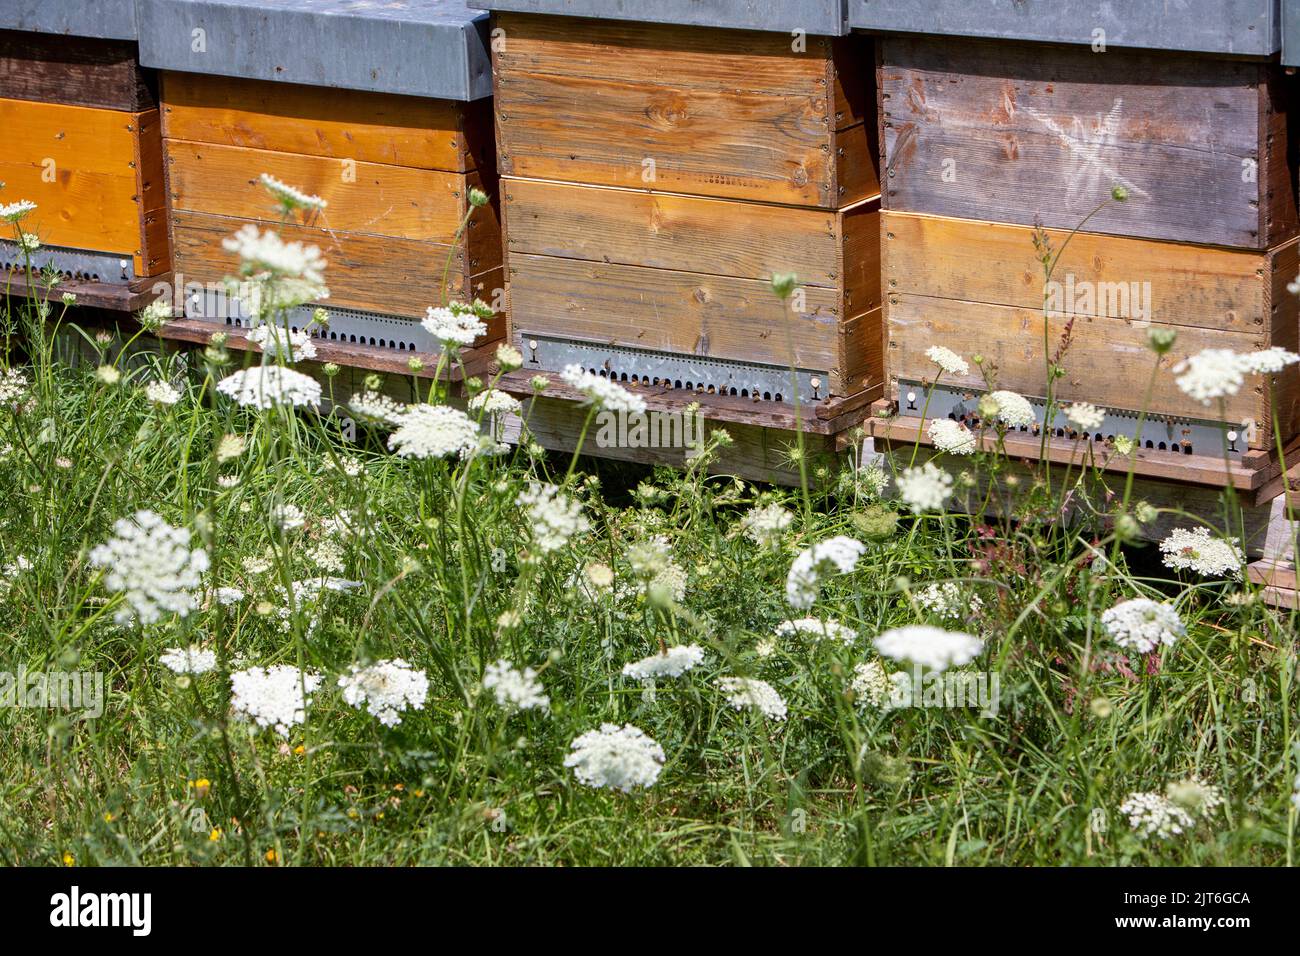 beehives and summer flowers in grass Stock Photo